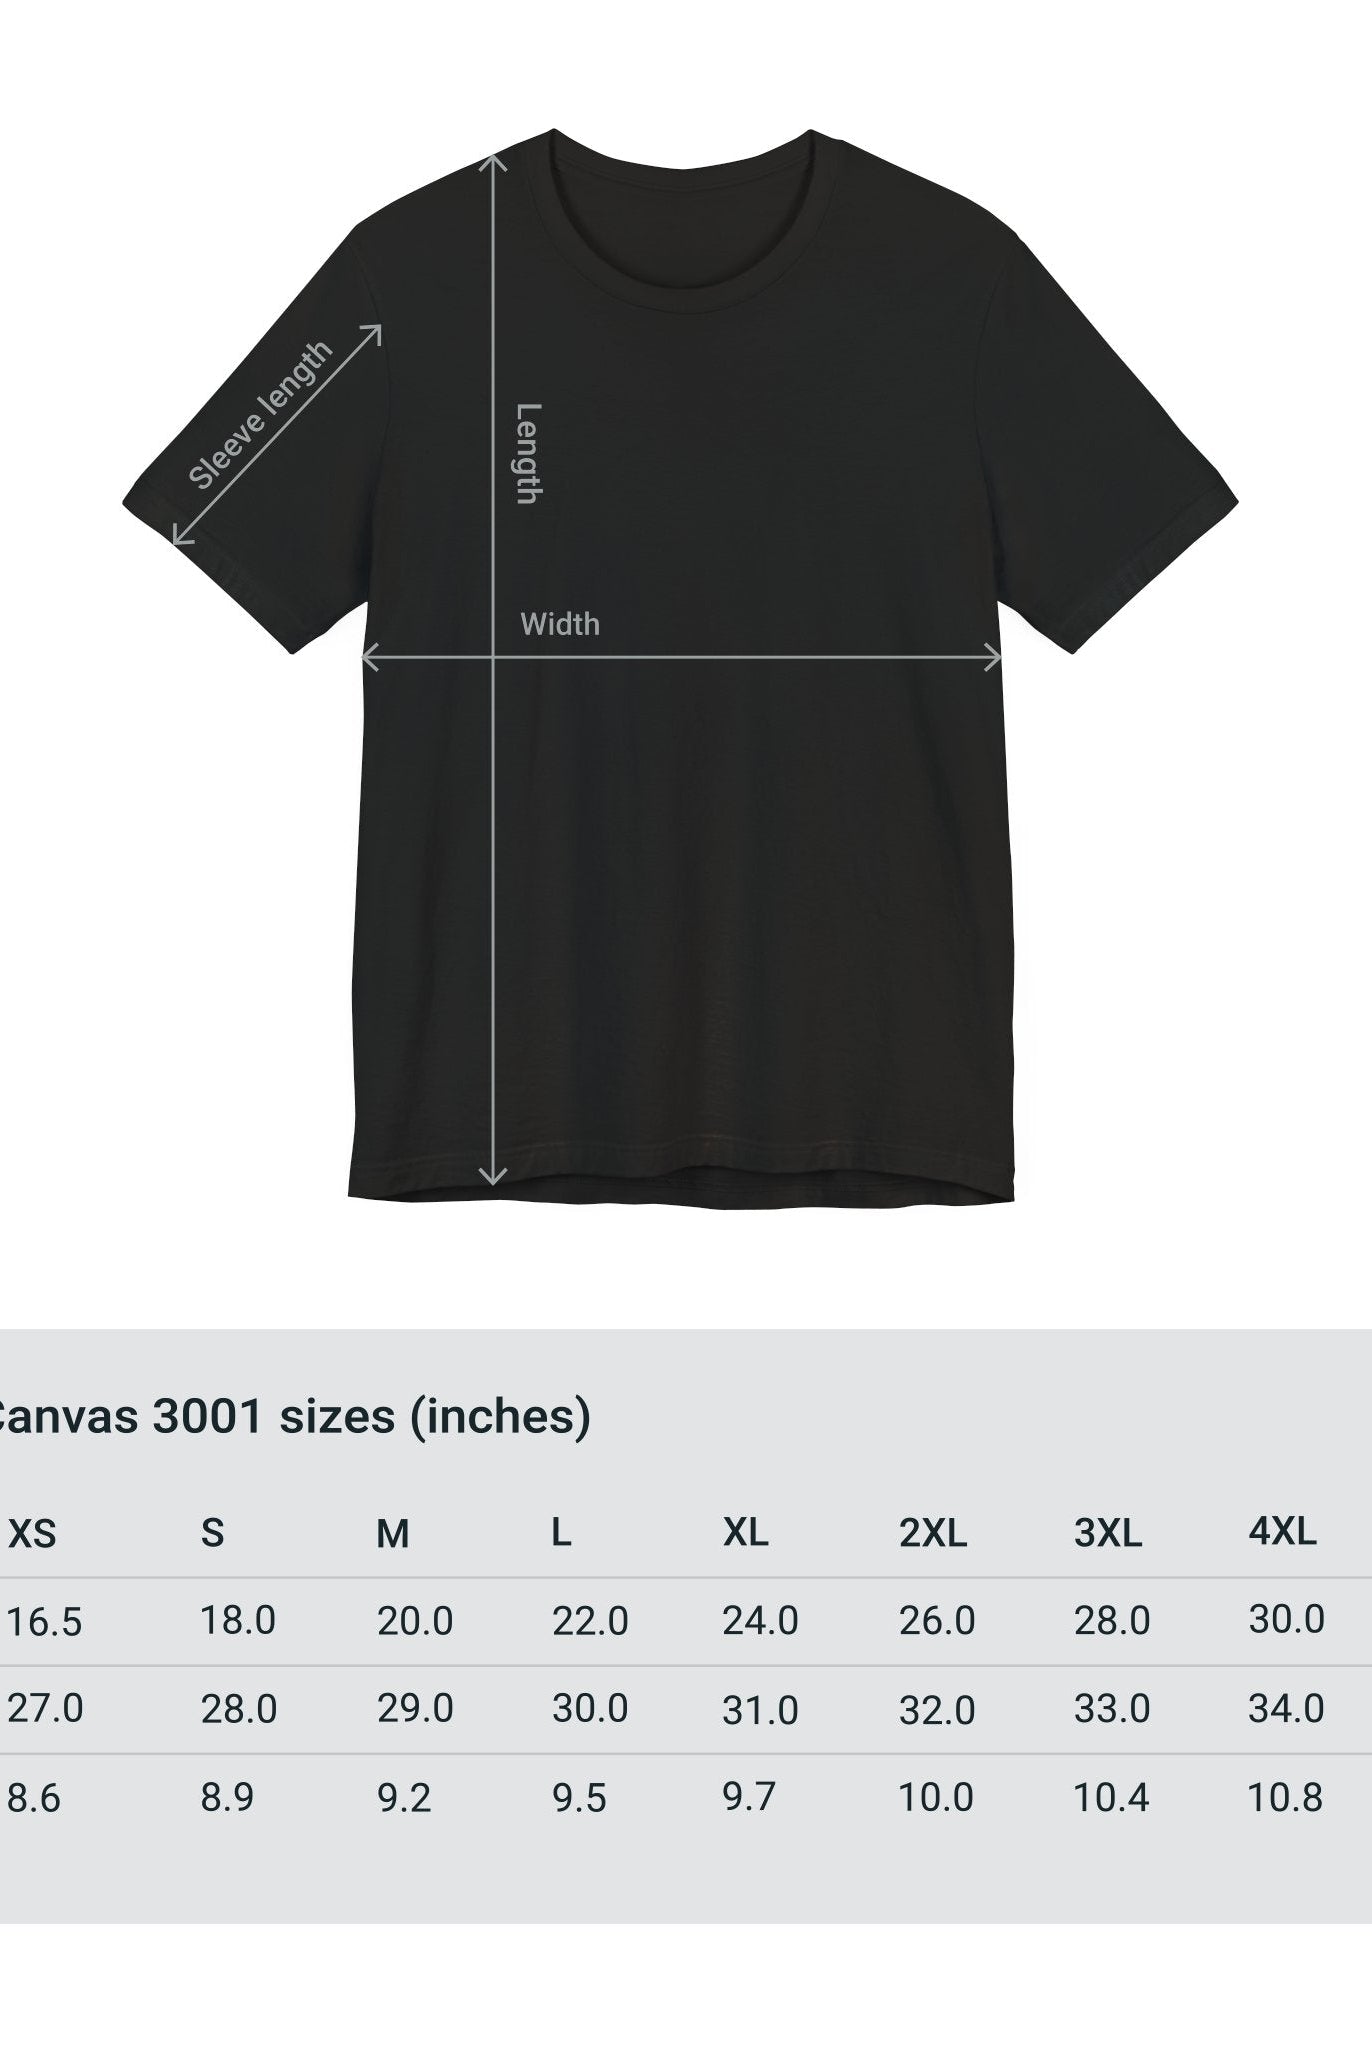 Adventure Unlimited black t-shirt with size measurements, direct-to-garment printed item